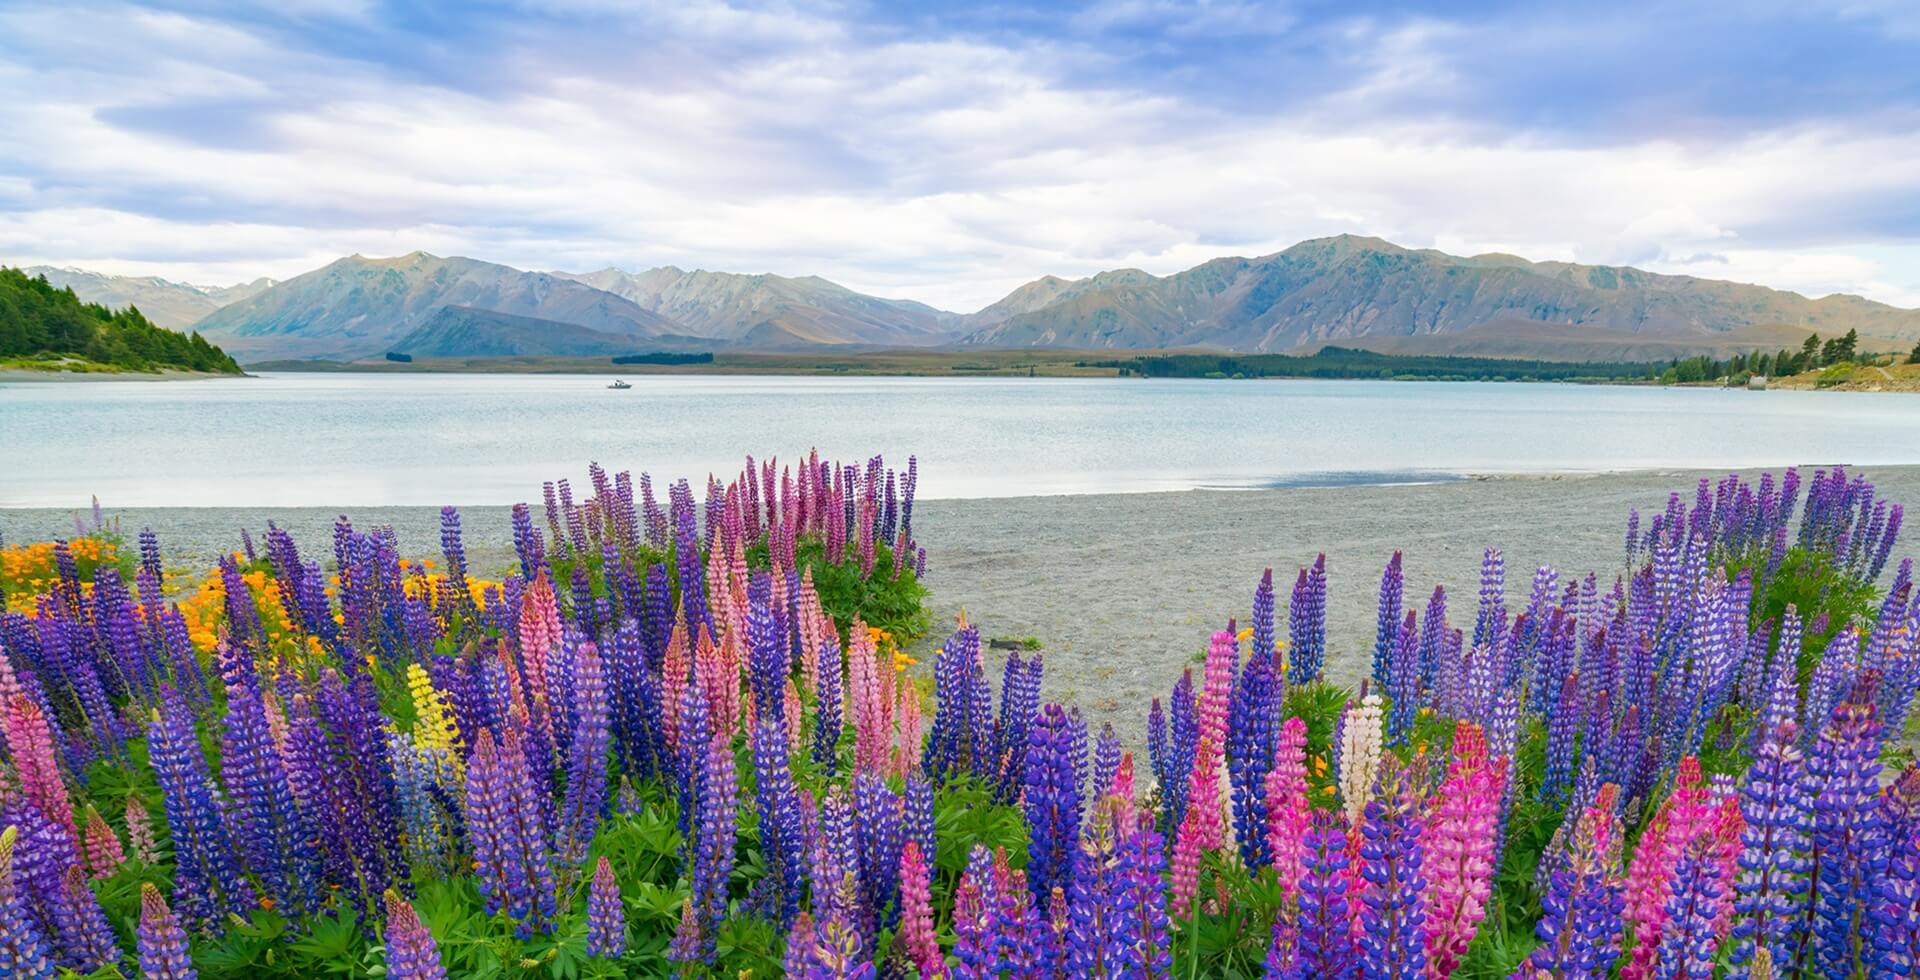 Footer Landscape at Lake Tekapo and Lupine Field in New Zealand. Lupin field at lake Tekapo hit full bloom in December, summer season of New Zealand